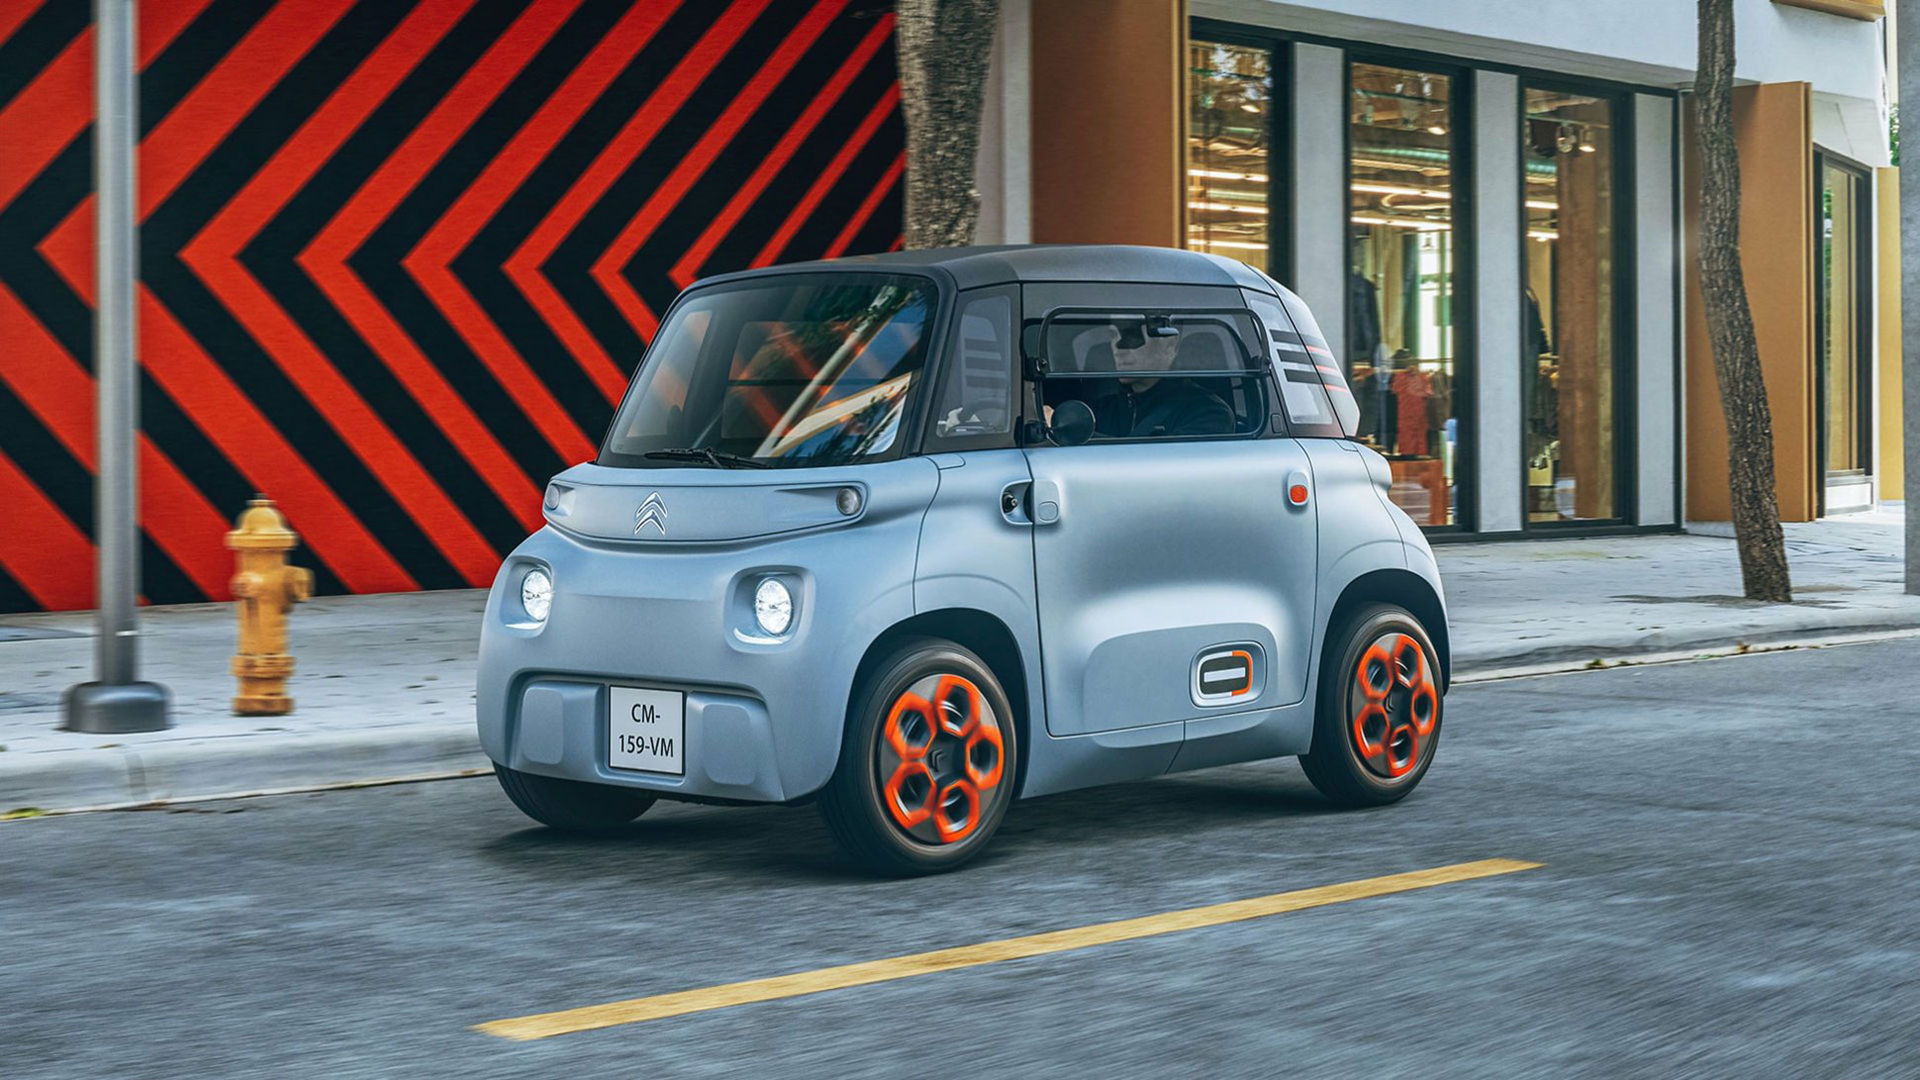 Citroën shows a small and cute electric car that can be driven by 14